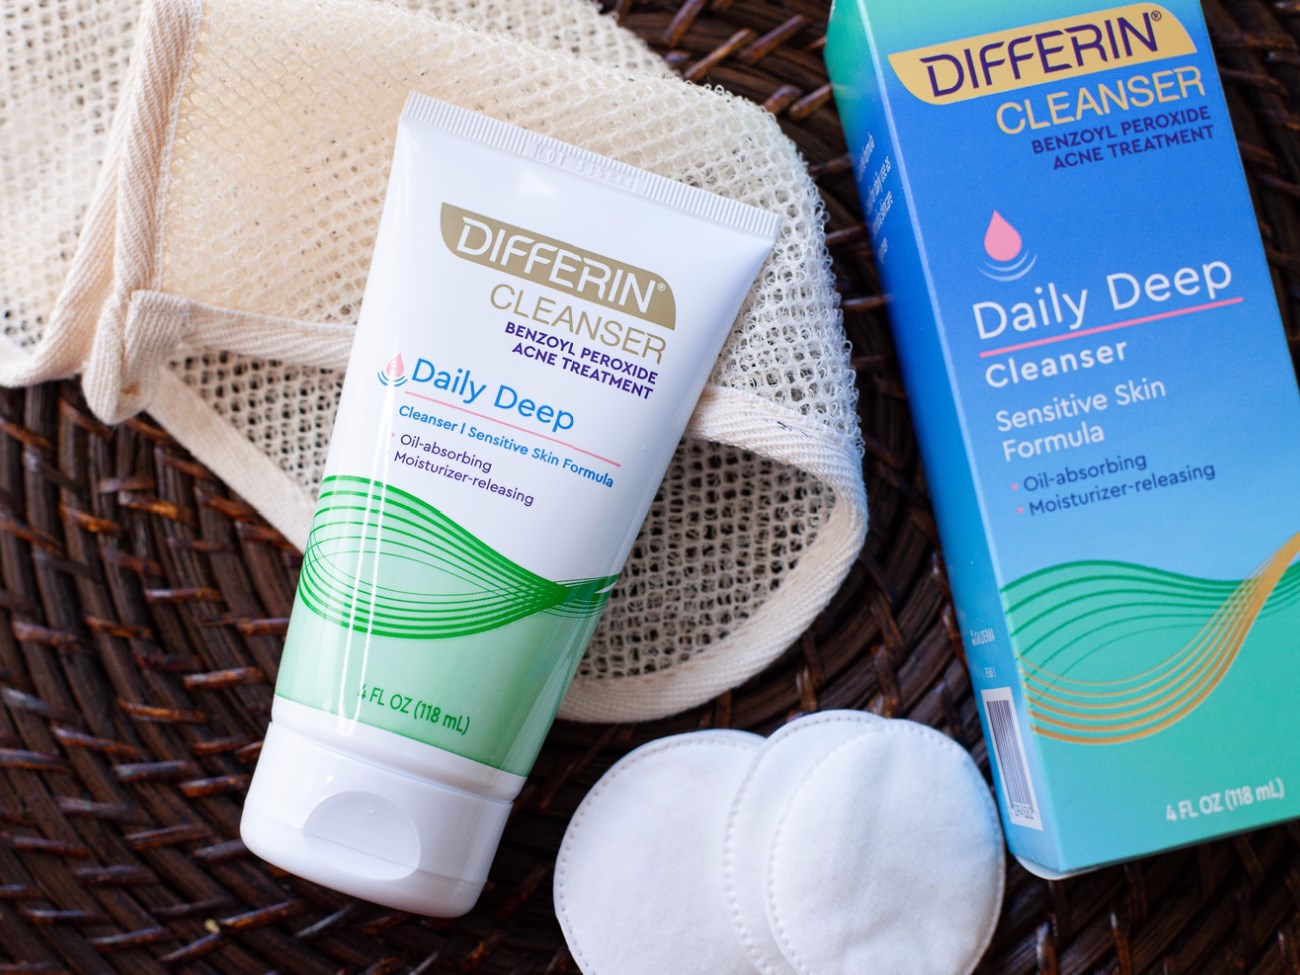 Differin Acne Products On Sale At Publix – Save Over $6!